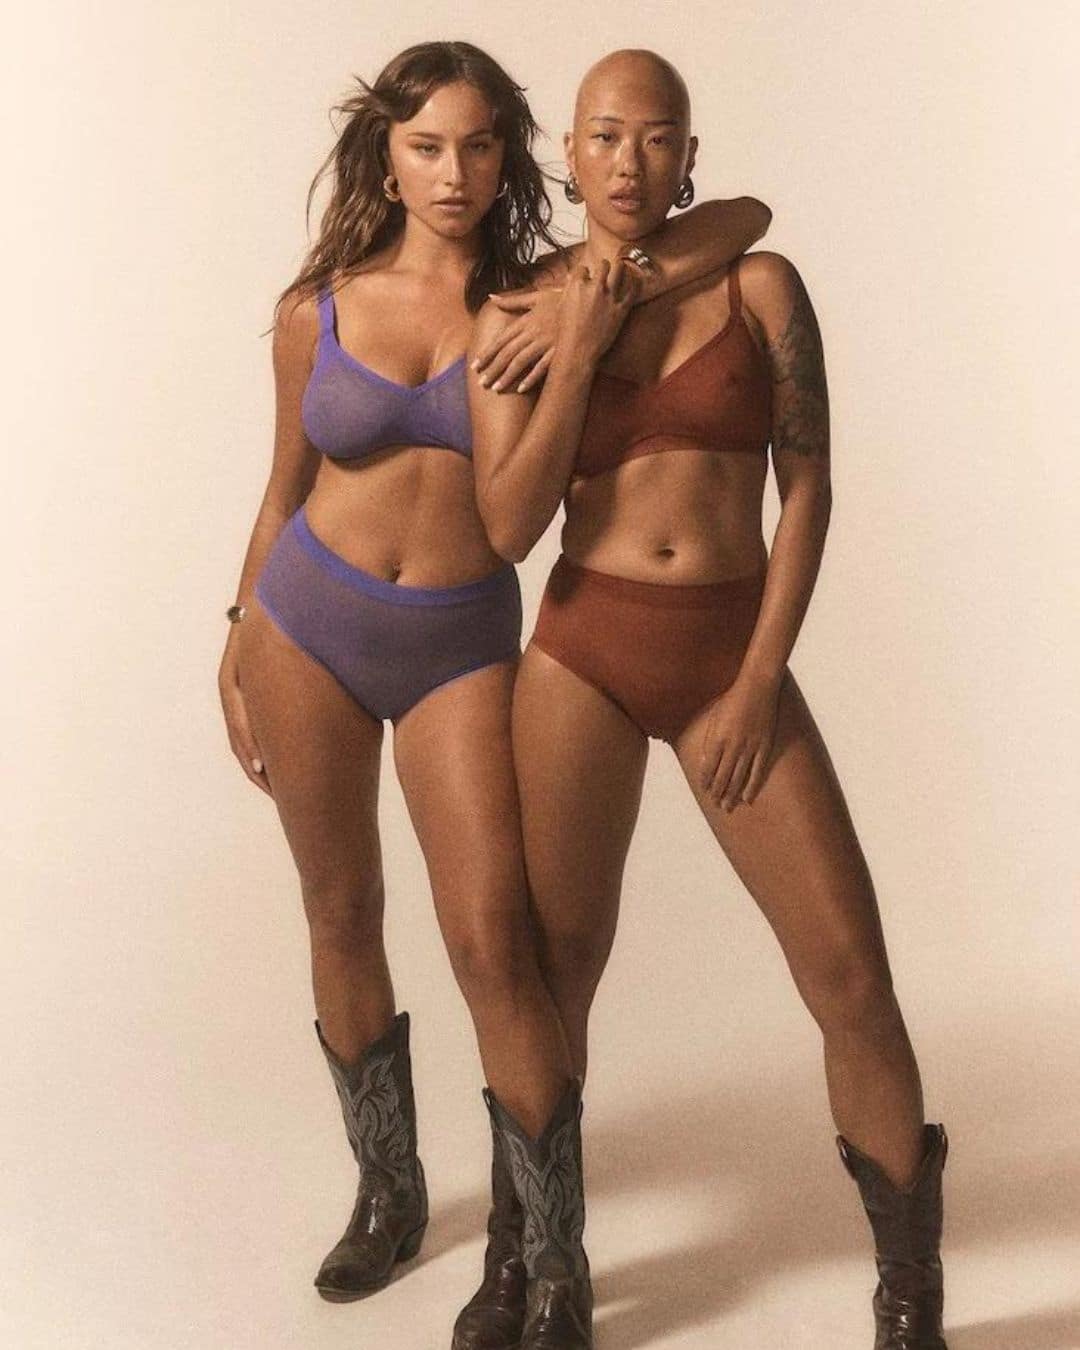 Meet Nala is the lingerie label dedicated to making inclusive undies